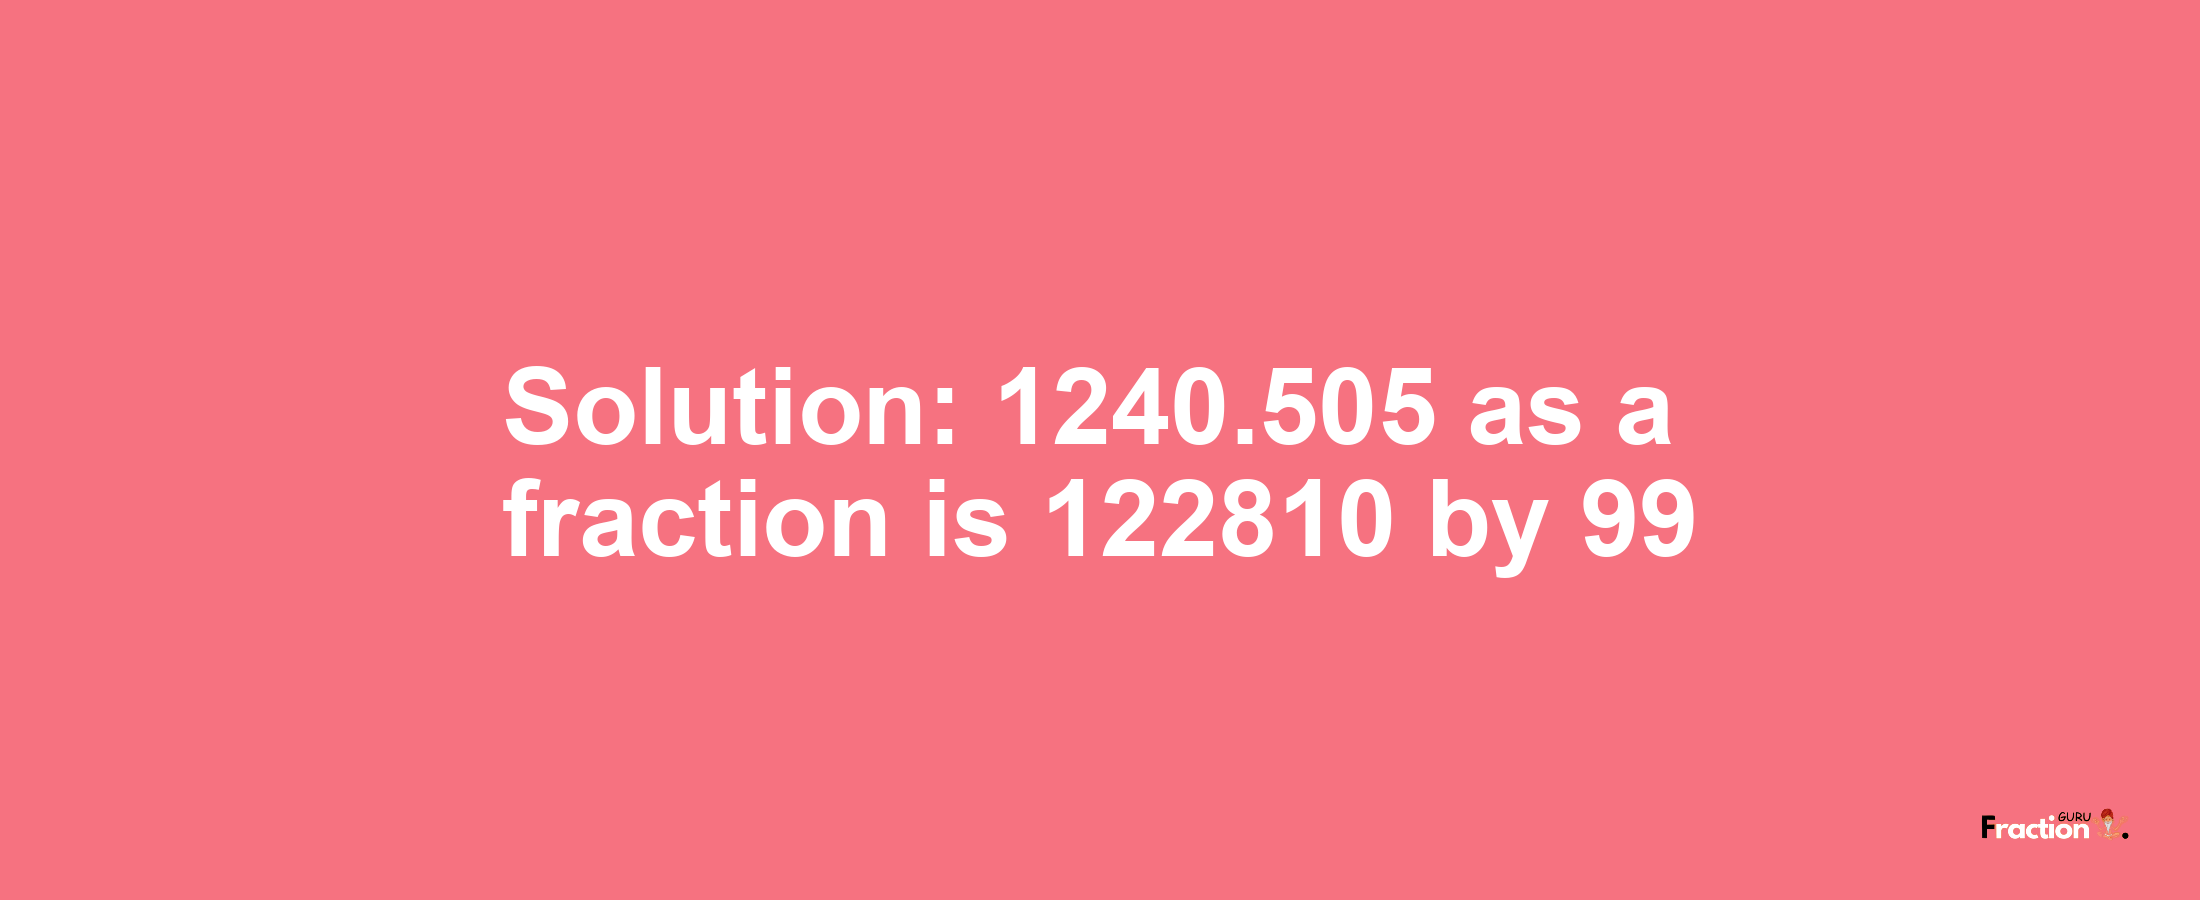 Solution:1240.505 as a fraction is 122810/99